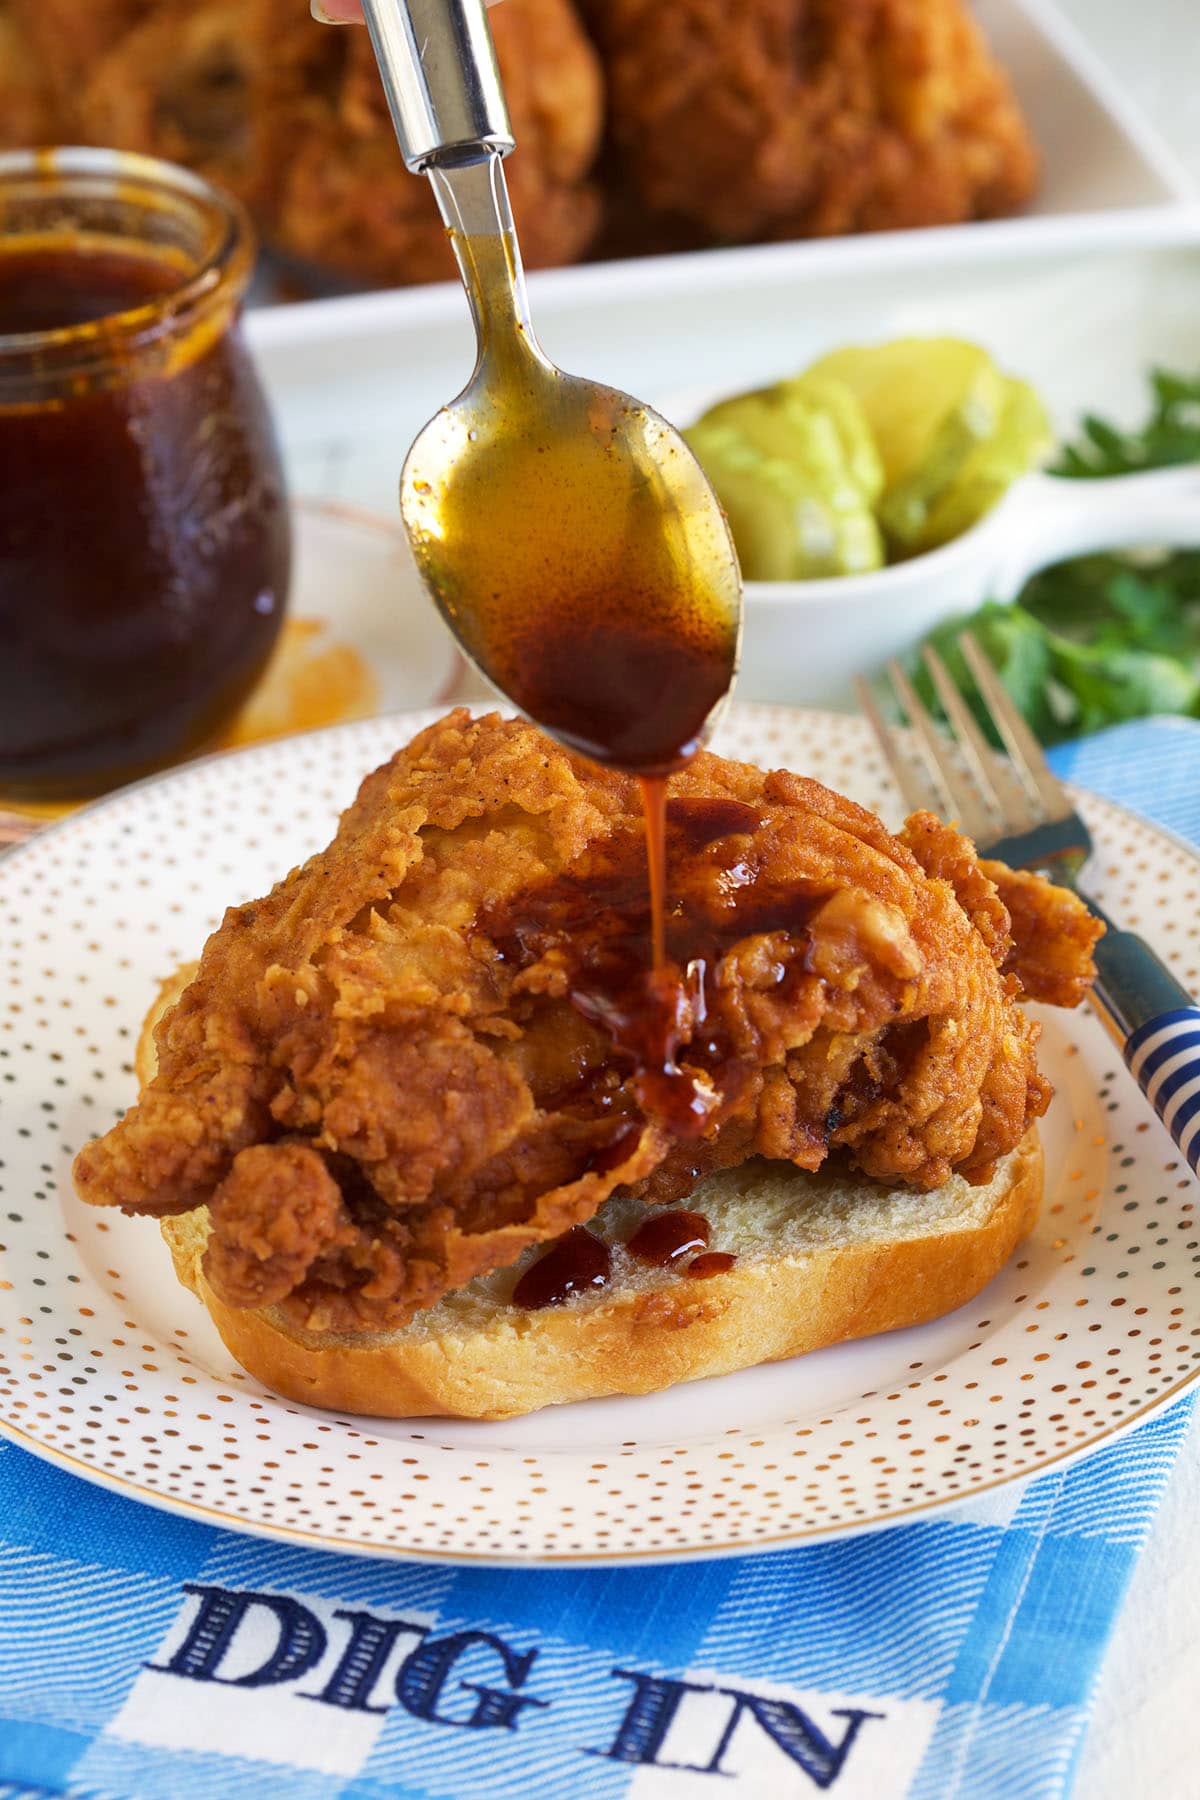 Nashville hot sauce is being drizzled over a piece of fried chicken. 